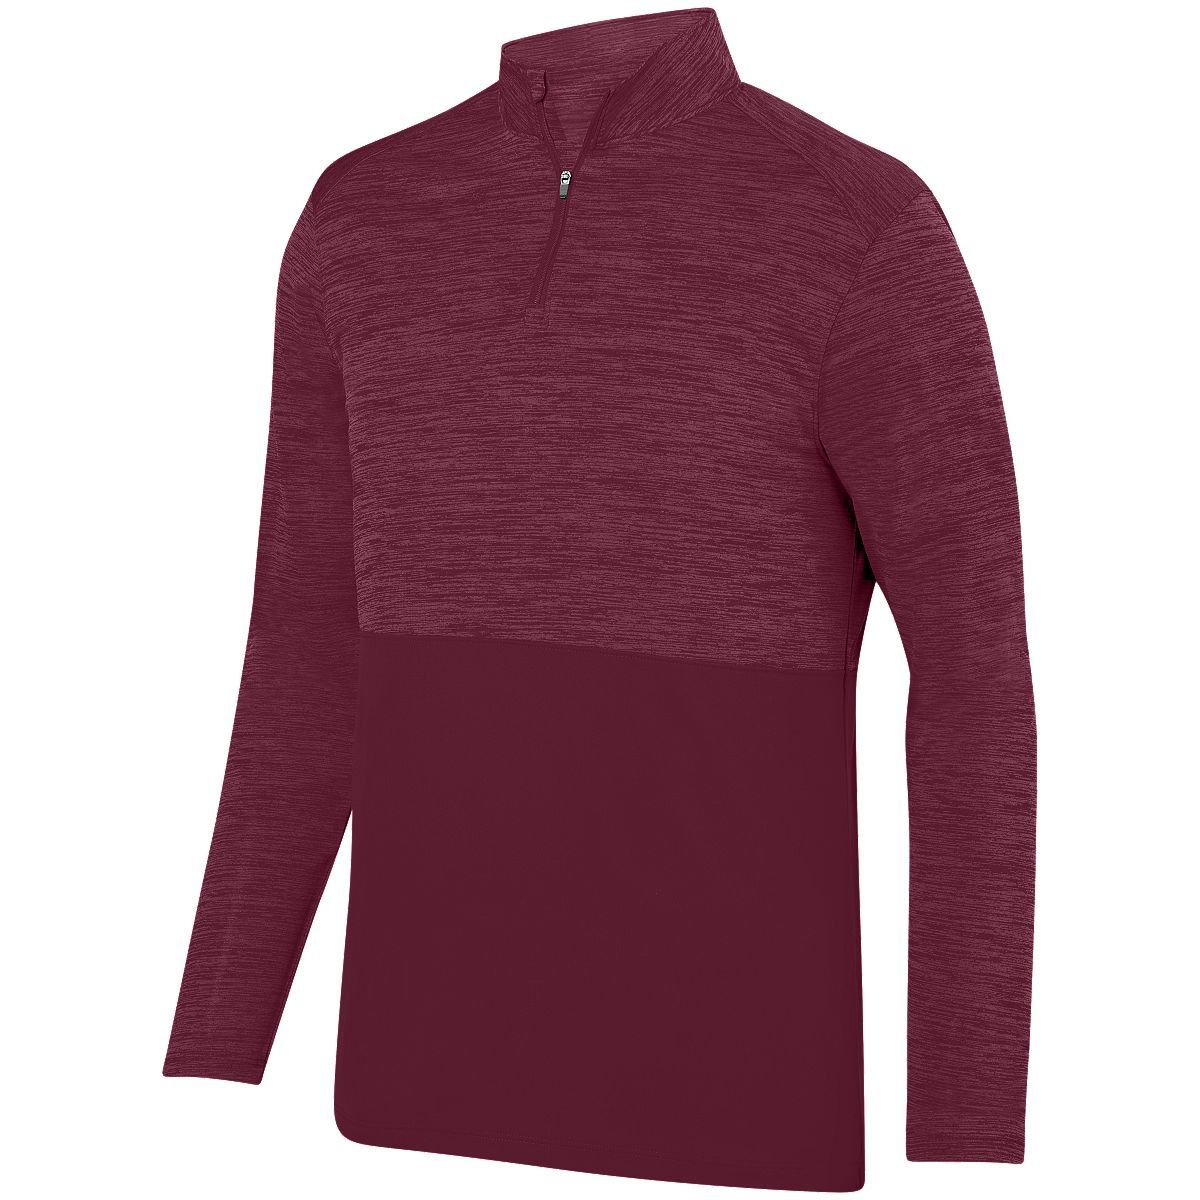 Augusta Sportswear Shadow Tonal Heather 1/4 Zip Pullover in Maroon  -Part of the Adult, Adult-Pullover, Augusta-Products, Outerwear, Tonal-Fleece-Collection product lines at KanaleyCreations.com